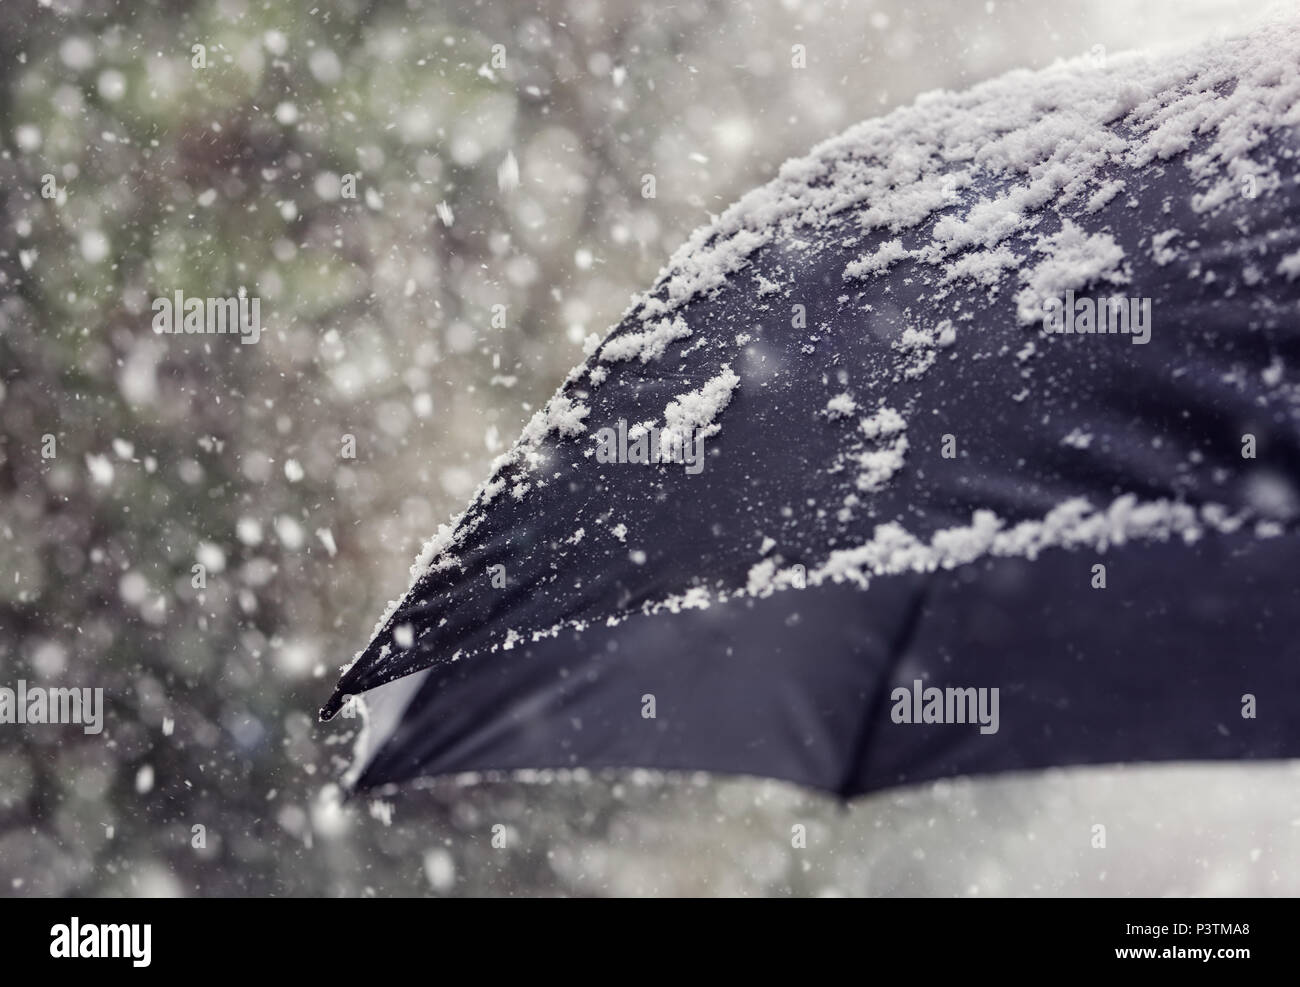 Snow flakes falling on a black umbrella concept for bad weather, winter or snowing blizzard Stock Photo